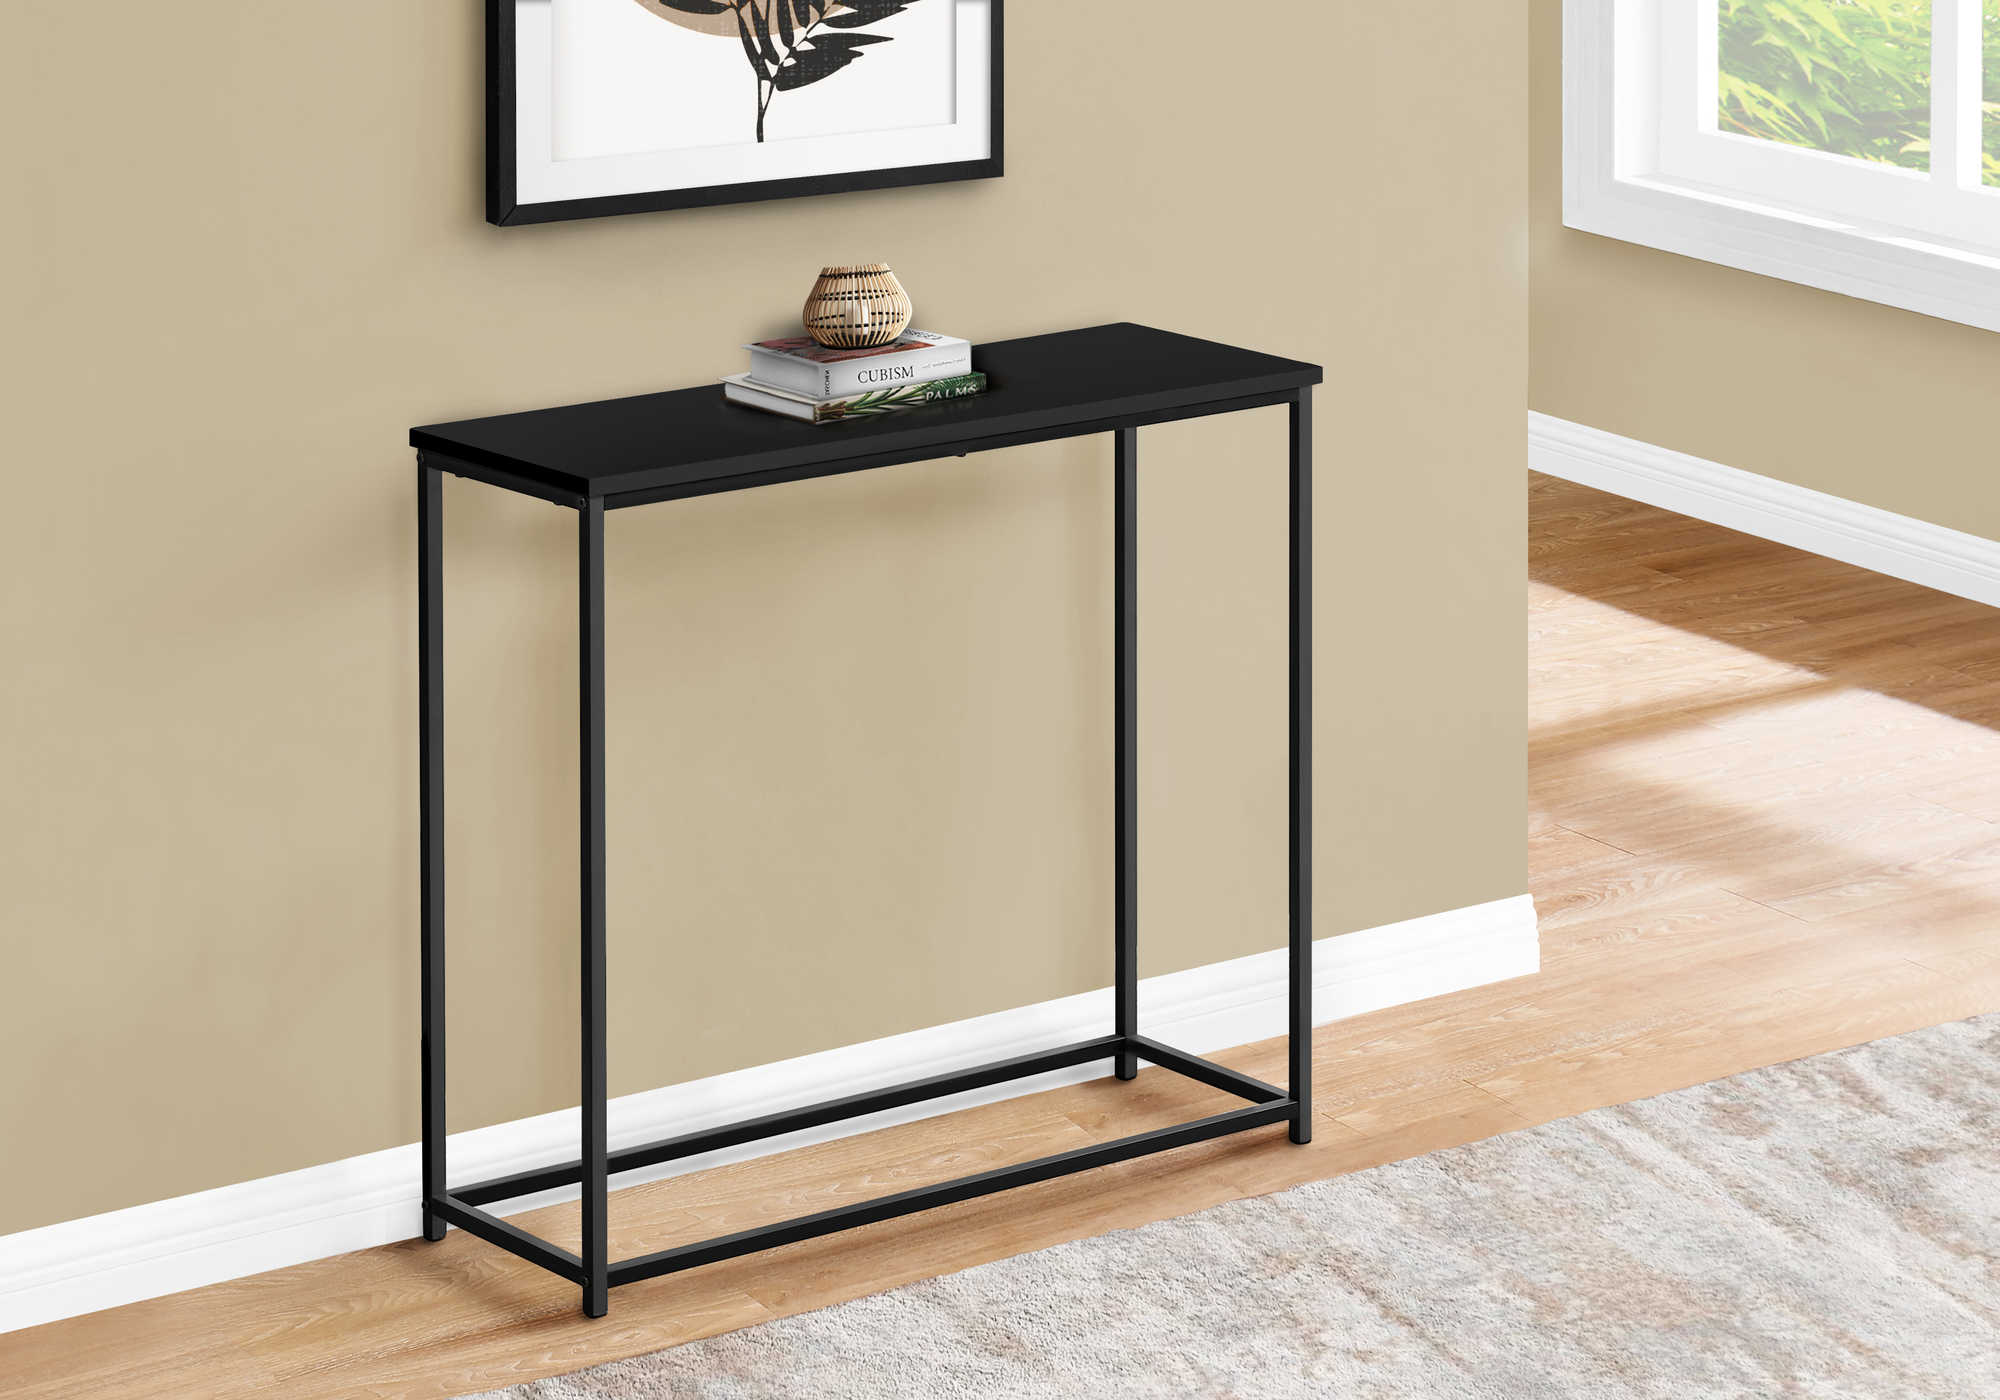 BEDROOM ACCENT CONSOLE TABLE - 32"L / BLACK / BLACK METAL HALL CONSOLE